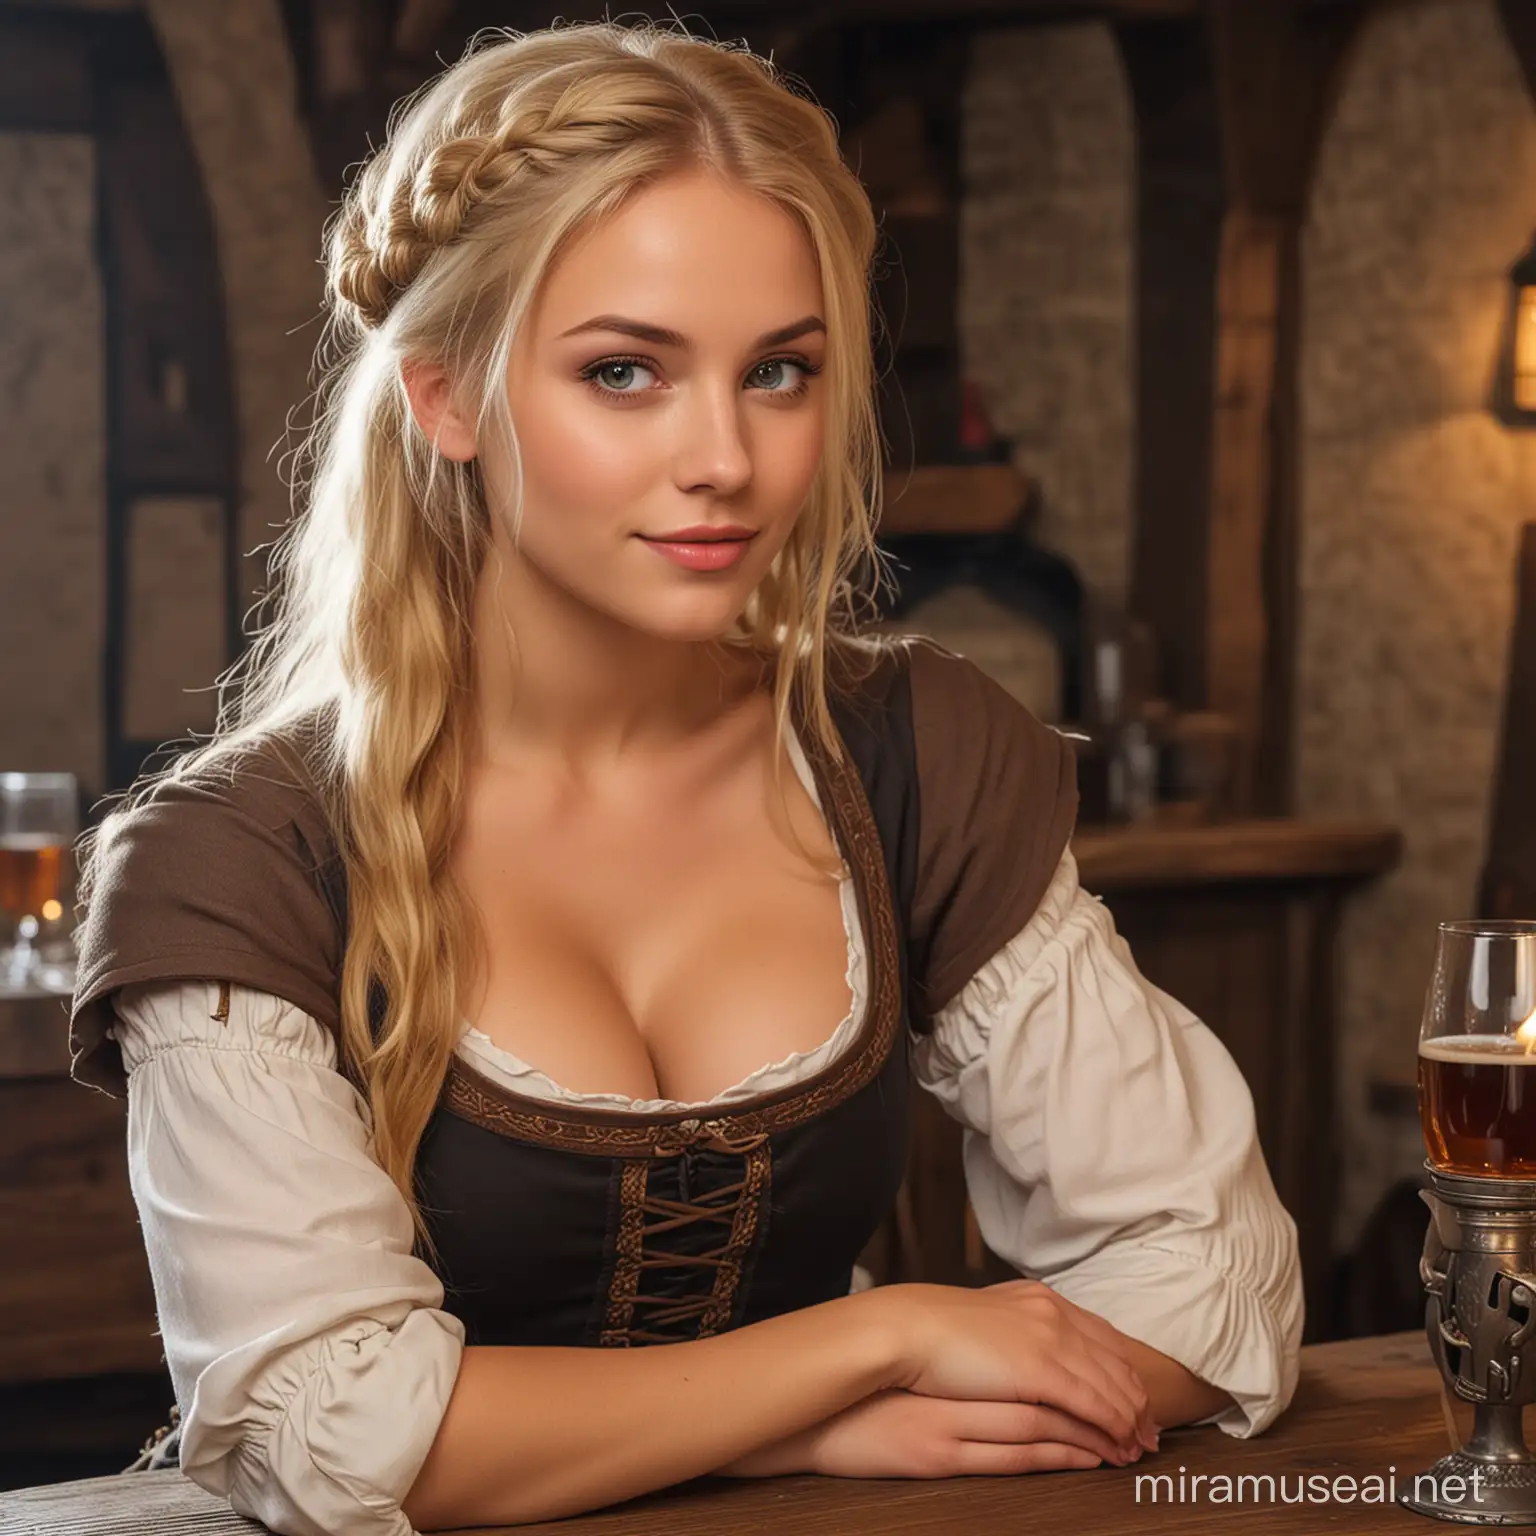 Medieval Tavern Ambiance with a Blonde Server